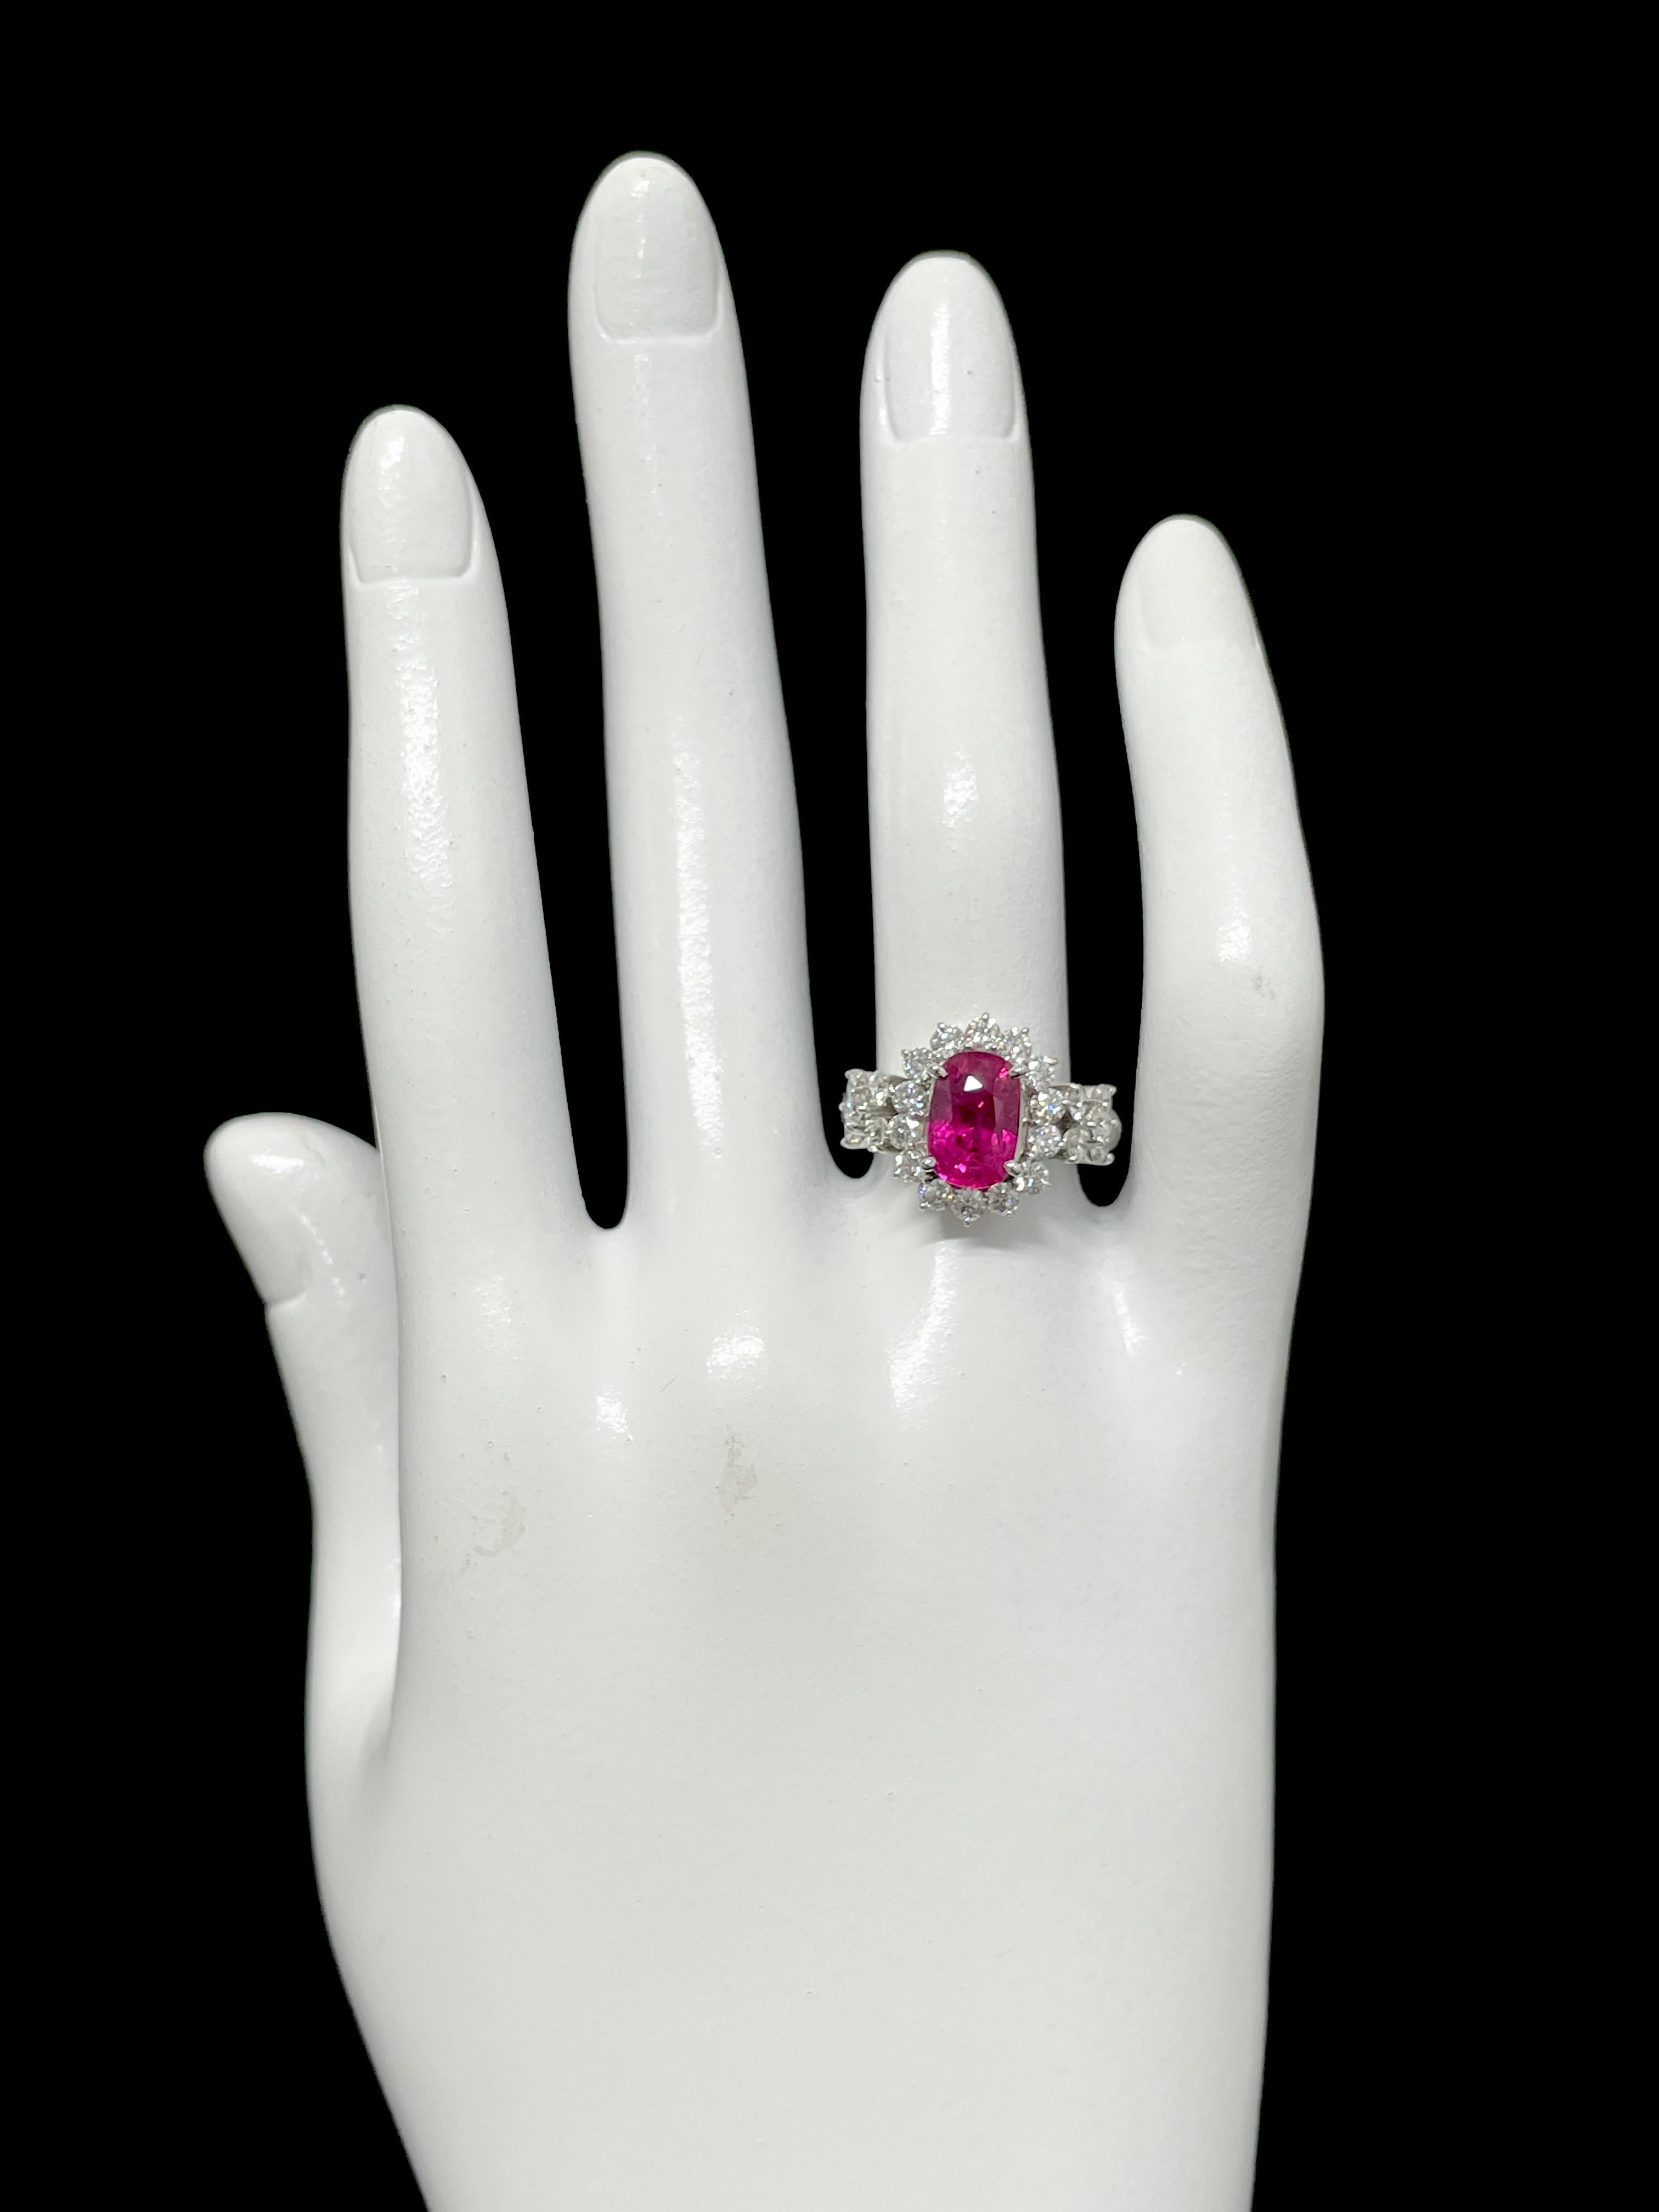 GIA Certified 3.08 Carat Natural African Ruby and Diamond Ring Set in Platinum 1